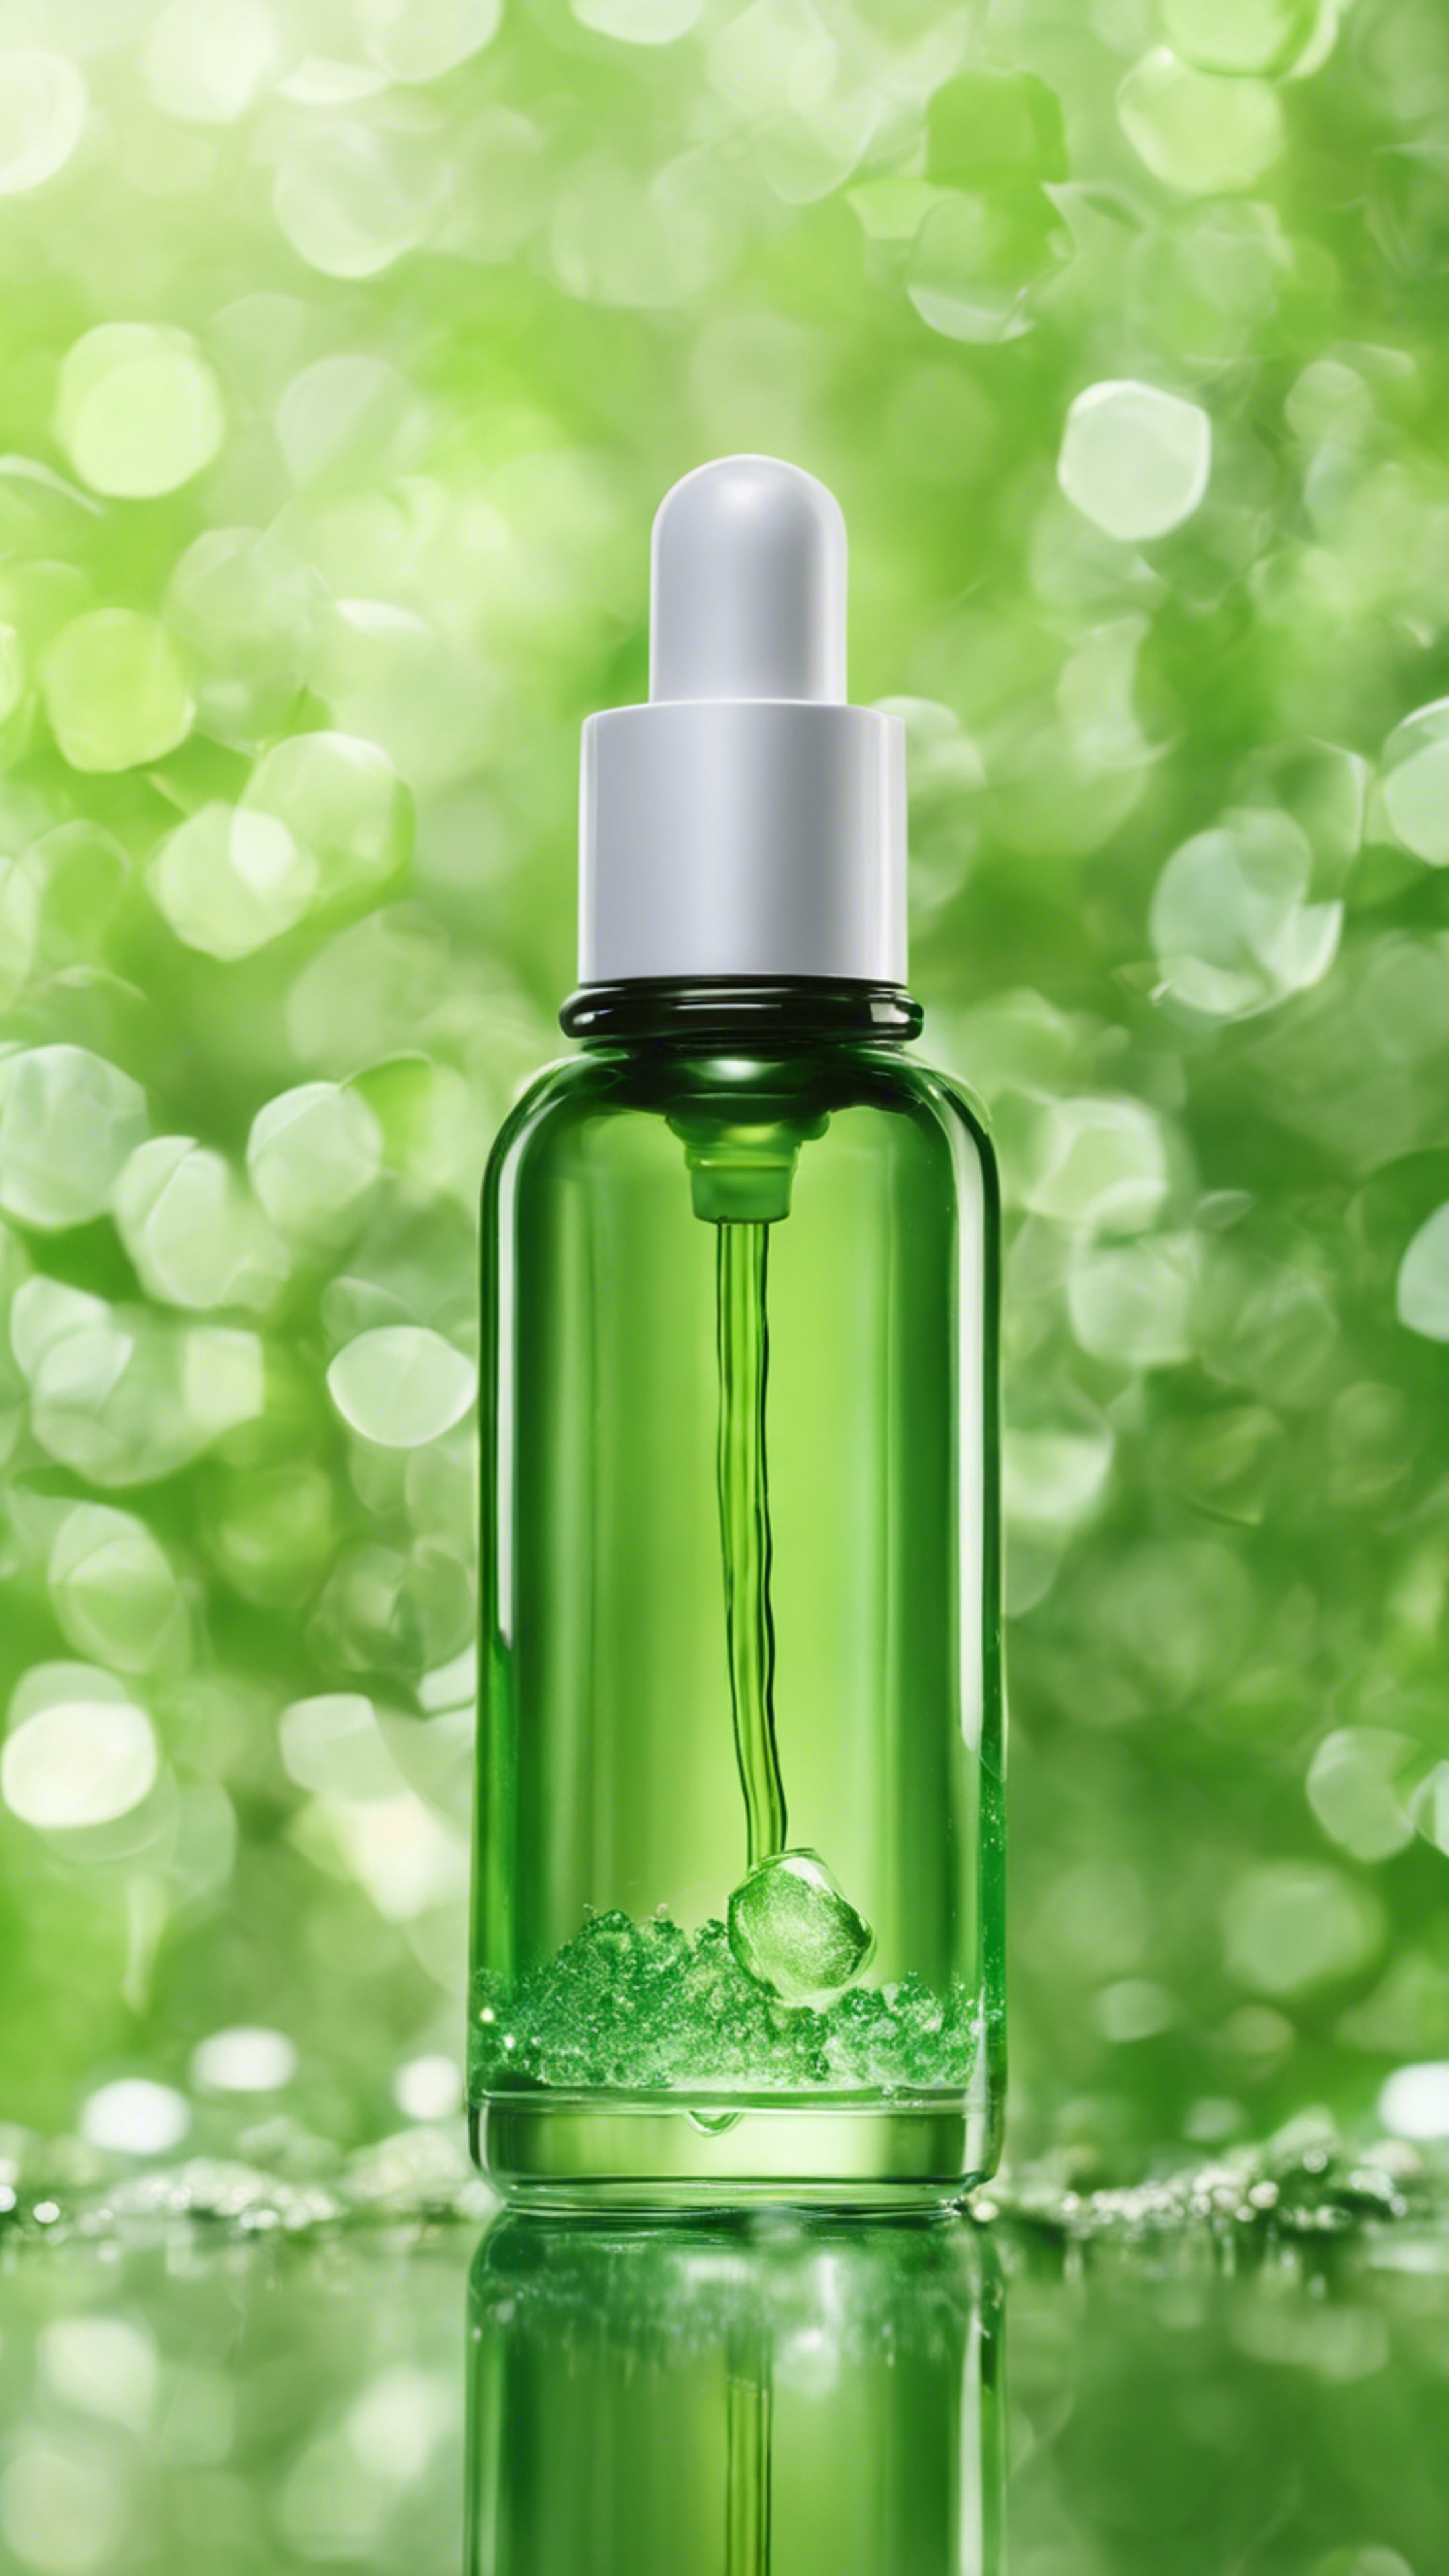 Green an eco-friendly cosmetics company's new hydrating face serum in a recyclable glass bottle. Tapeta na zeď[04a9344189e843ad9259]